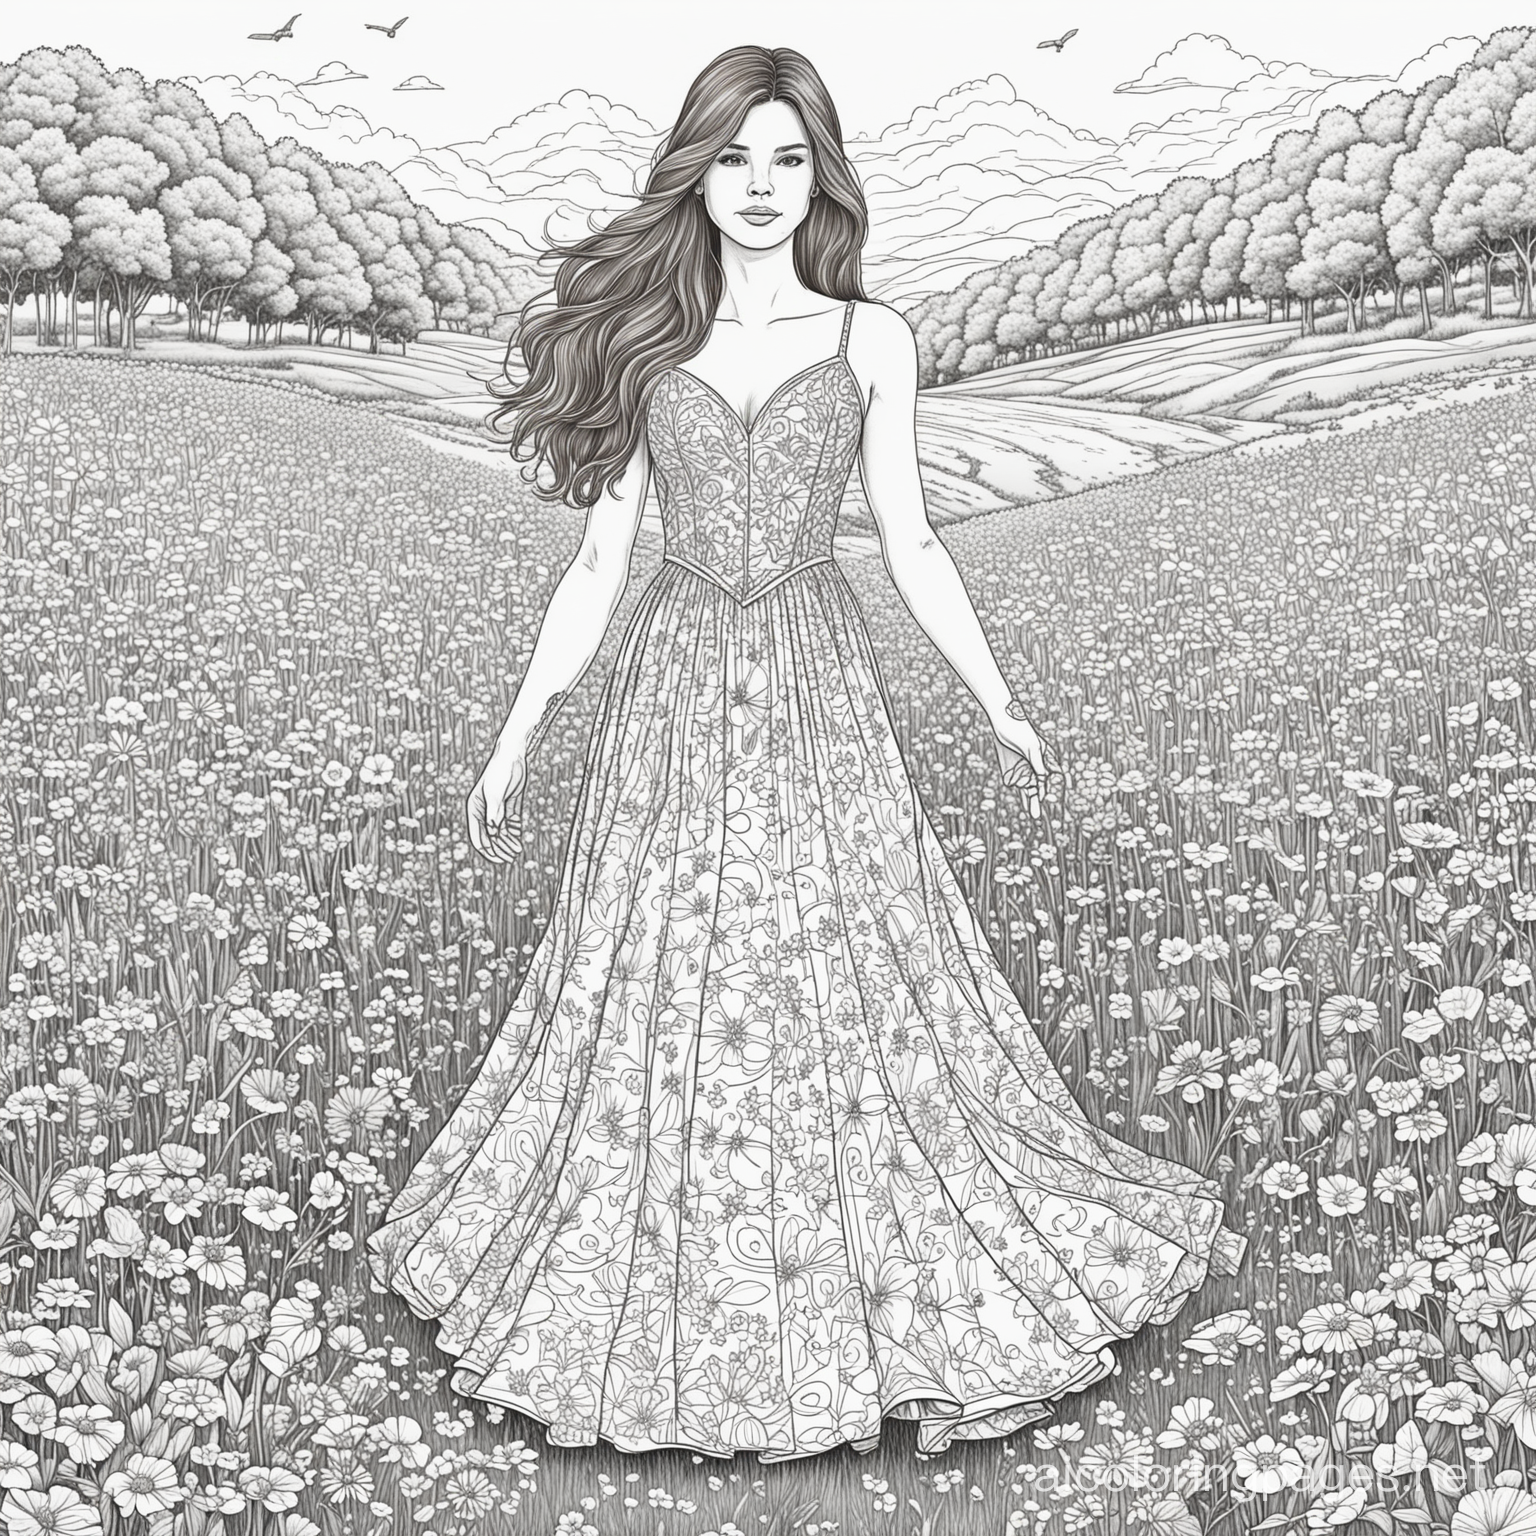 woman with long brown hair wearing a prom dress and standing in a field of flowers
, Coloring Page, black and white, line art, white background, Simplicity, Ample White Space. The background of the coloring page is plain white to make it easy for young children to color within the lines. The outlines of all the subjects are easy to distinguish, making it simple for kids to color without too much difficulty